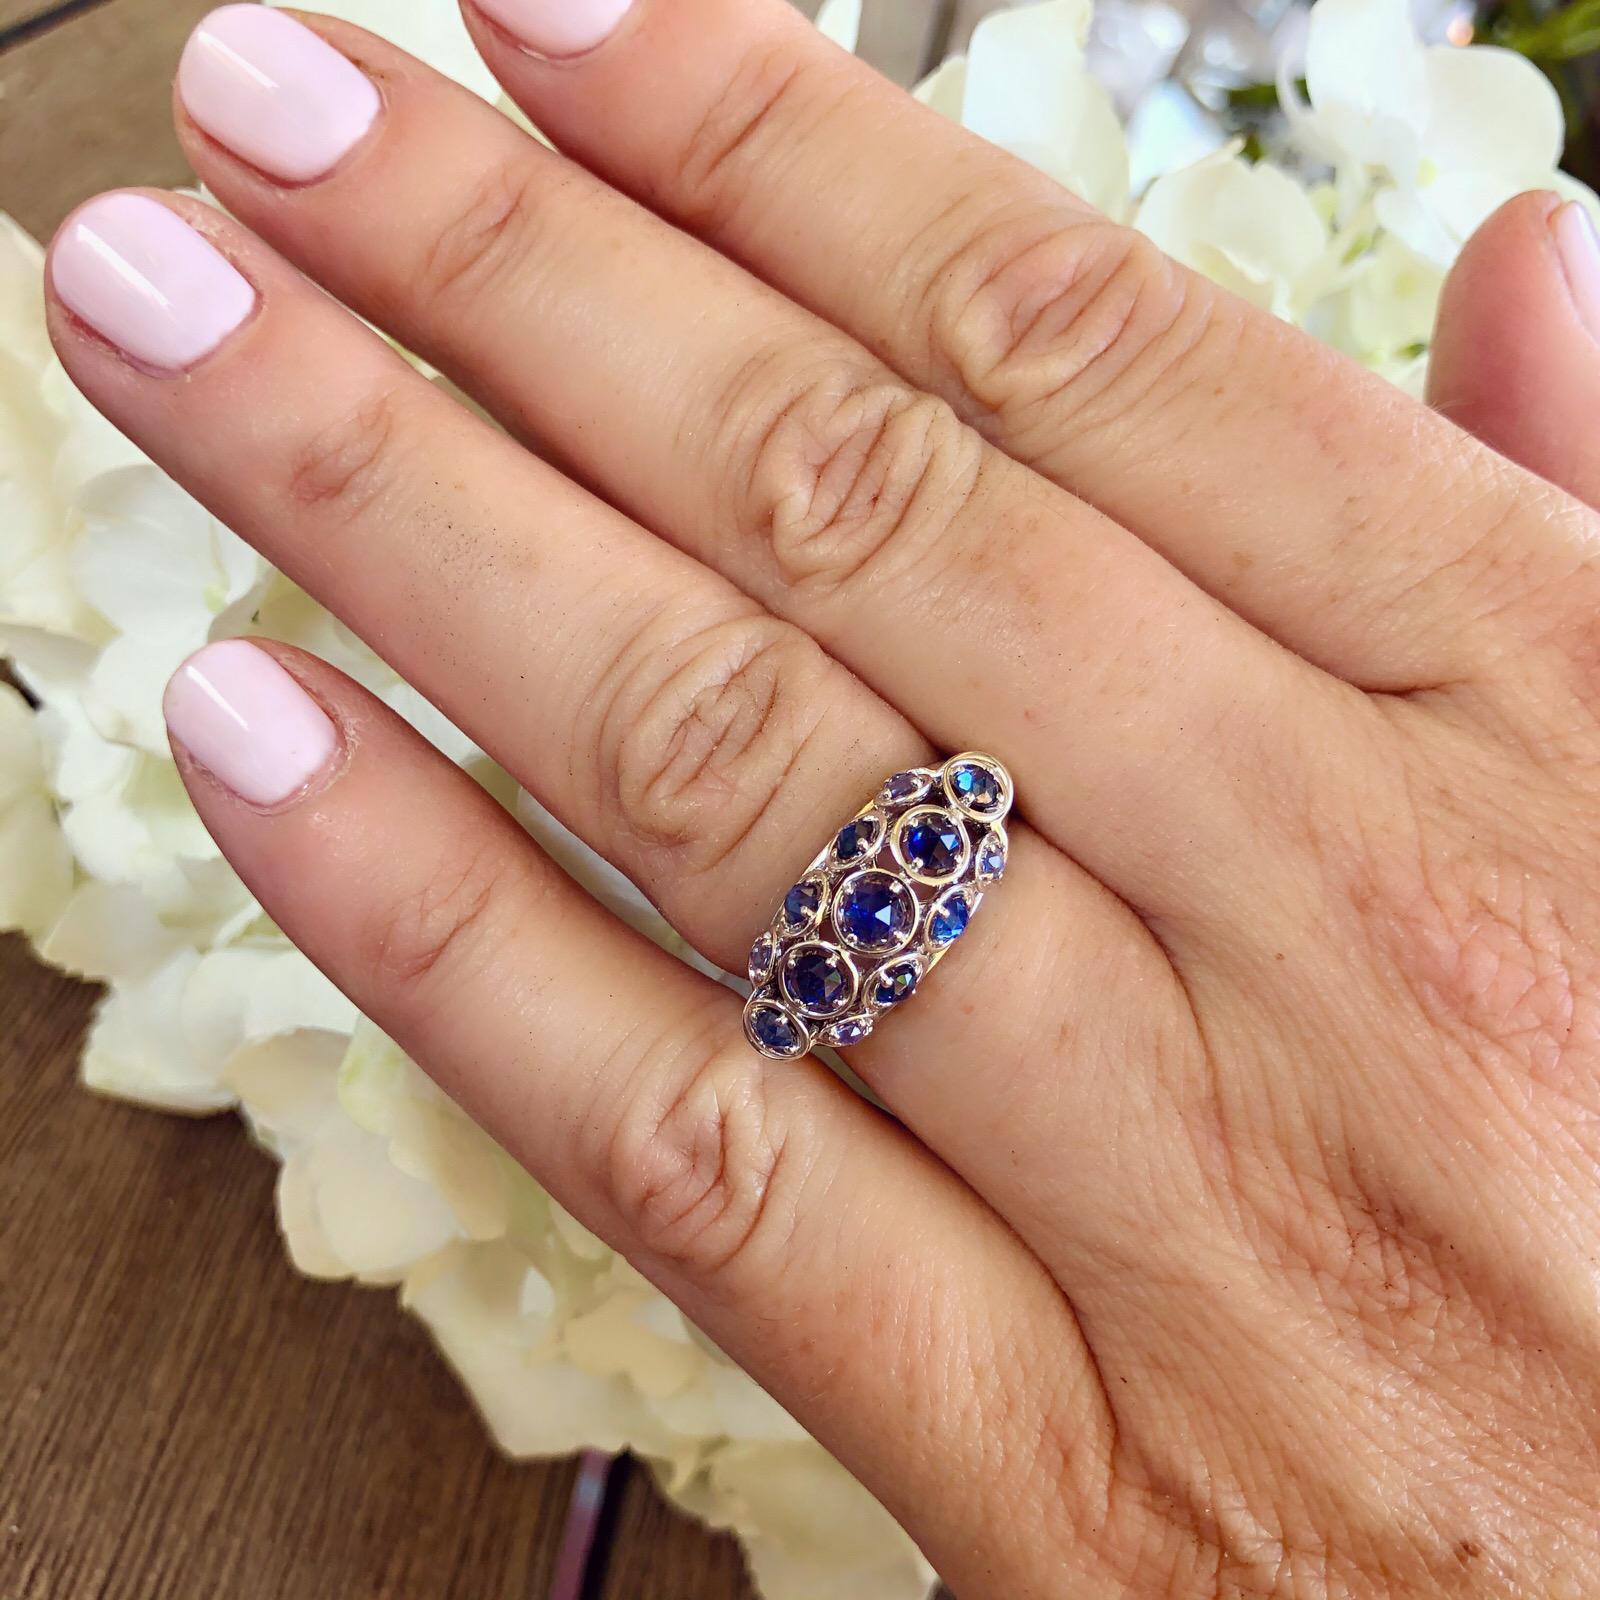 This unique 18k gold ring by famed designed Marina B. of the one and only Bulgari family, is a true find! The open domed design is set with 13 rose-cut multi-hued blue sapphires weighing 1.04 carats, weighs 5.5 grams, and is currently size 6.5 (with